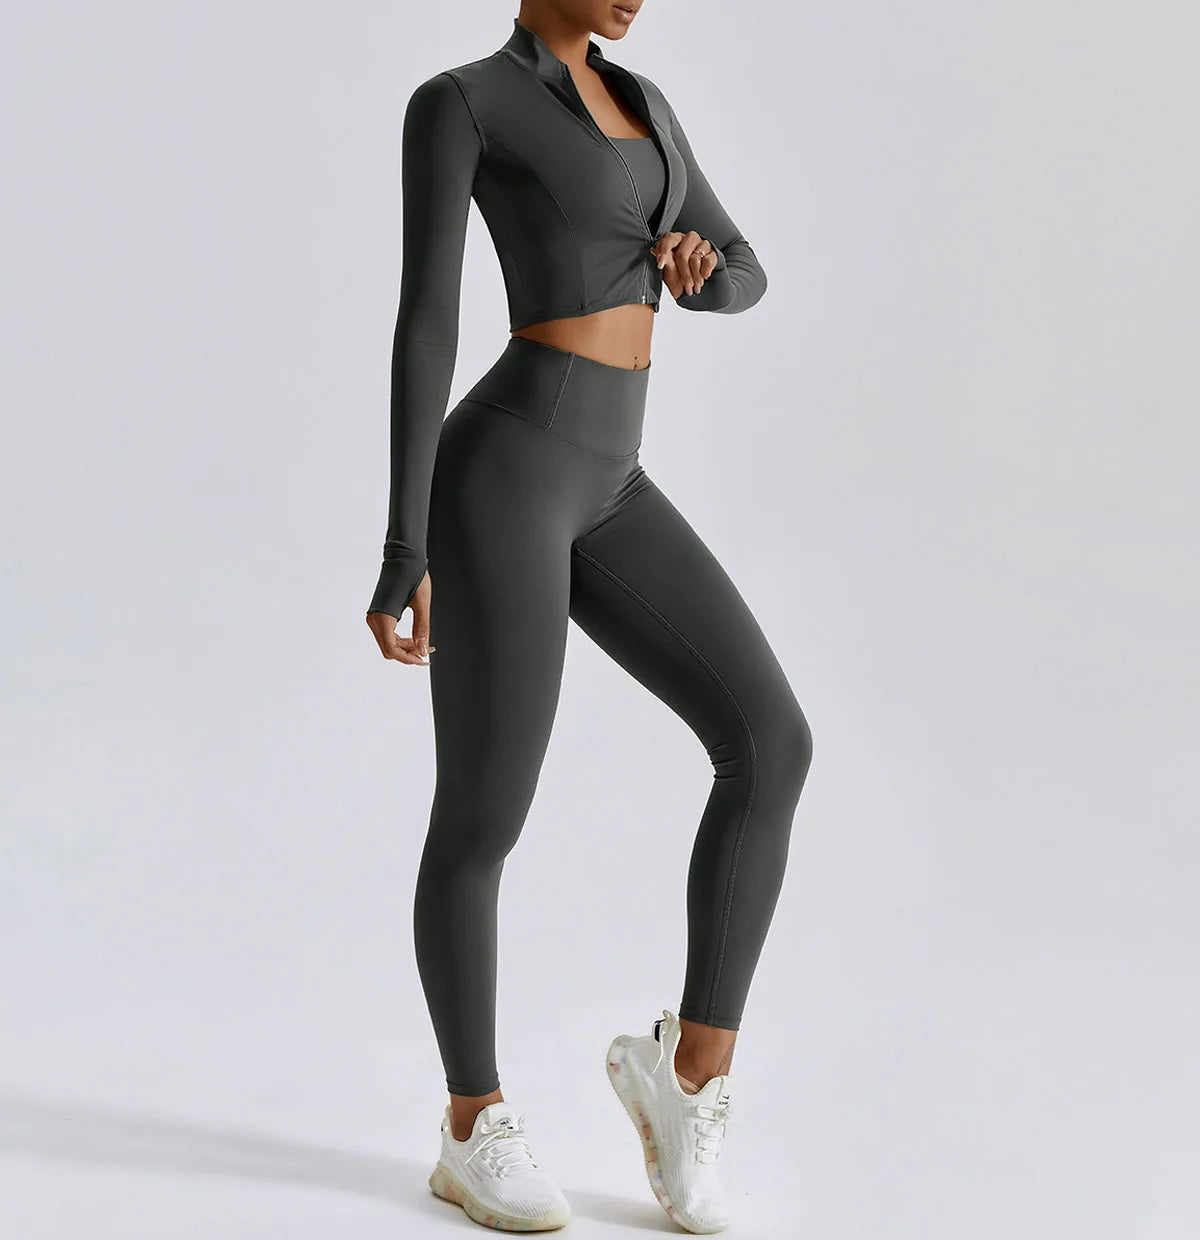 Chic Sports Top and Leggings & Shorts Set